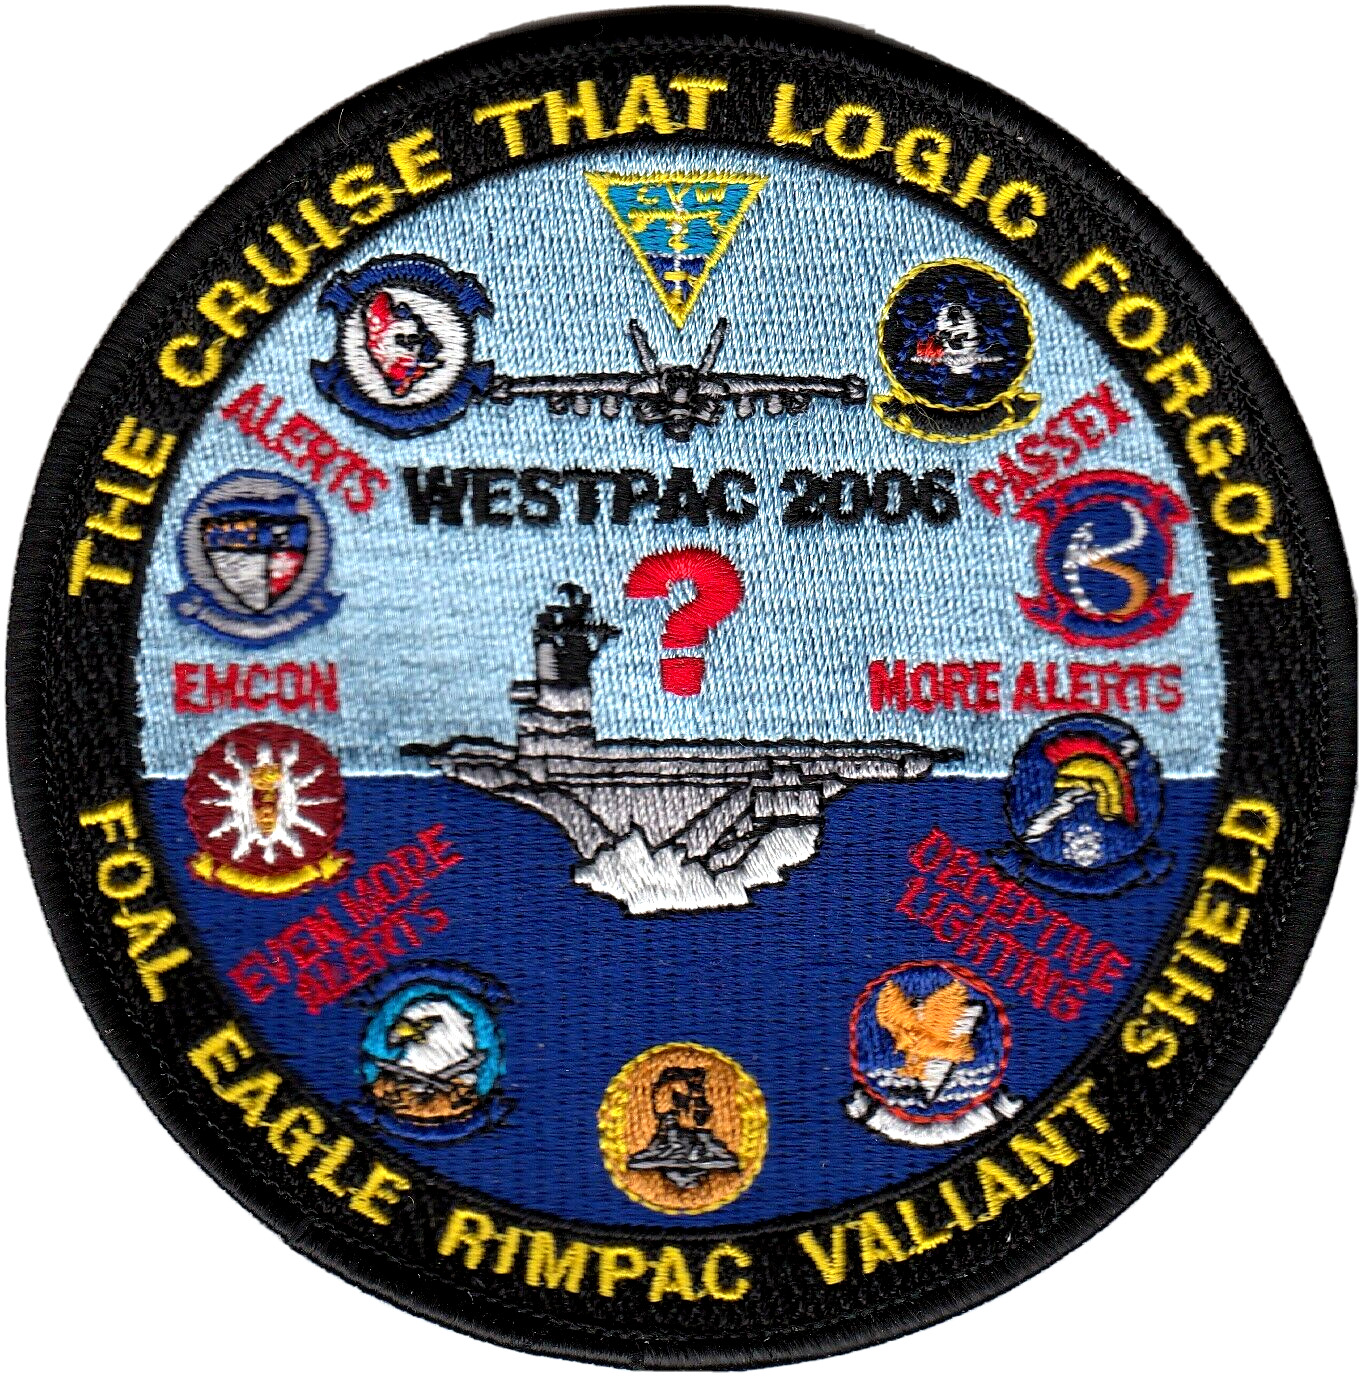 CARRIER AIR WING 2 THE CRUISE THAT LOGIC FORGOT WESTPAC 2006 CRUISE PATCH